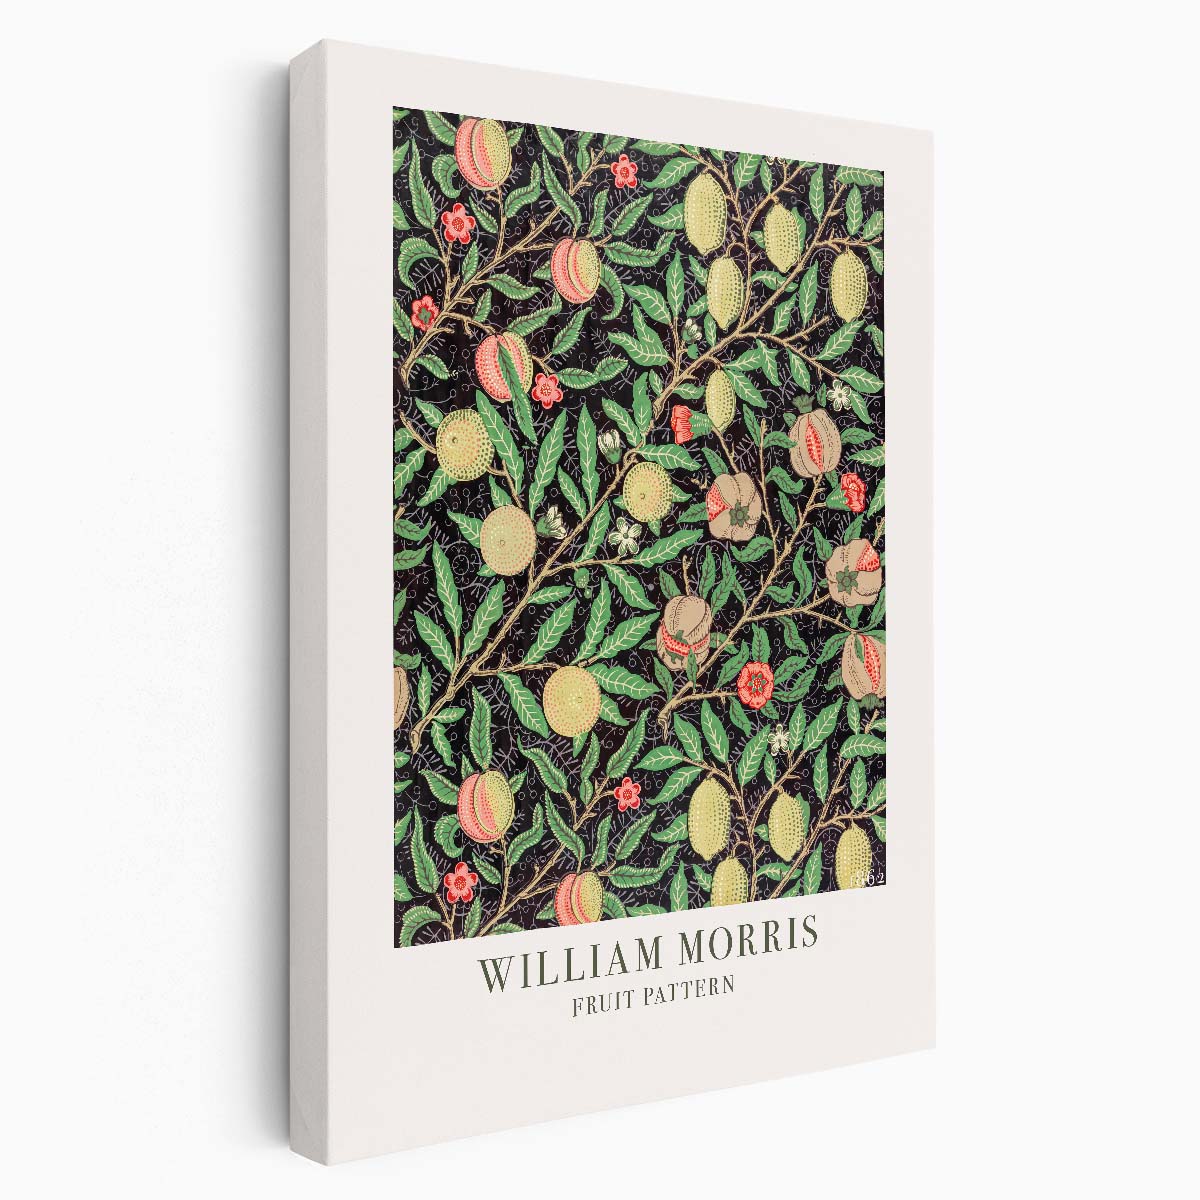 William Morris Vintage Floral Illustration Poster, Motivational Quote Wall Art by Luxuriance Designs, made in USA